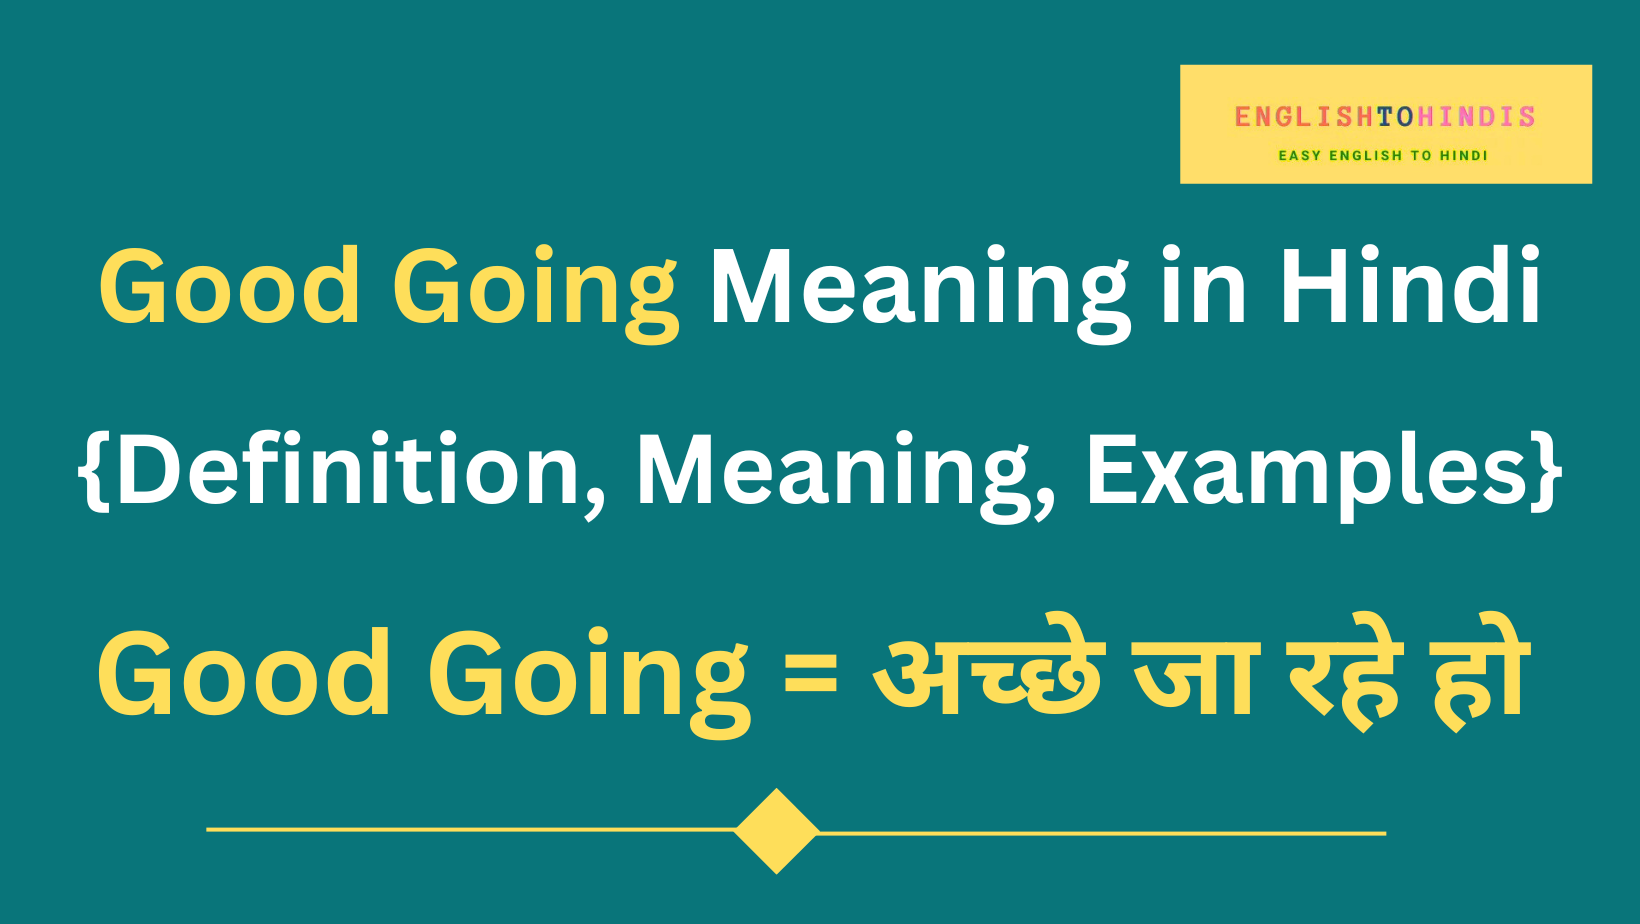 Good Going Meaning in Hindi